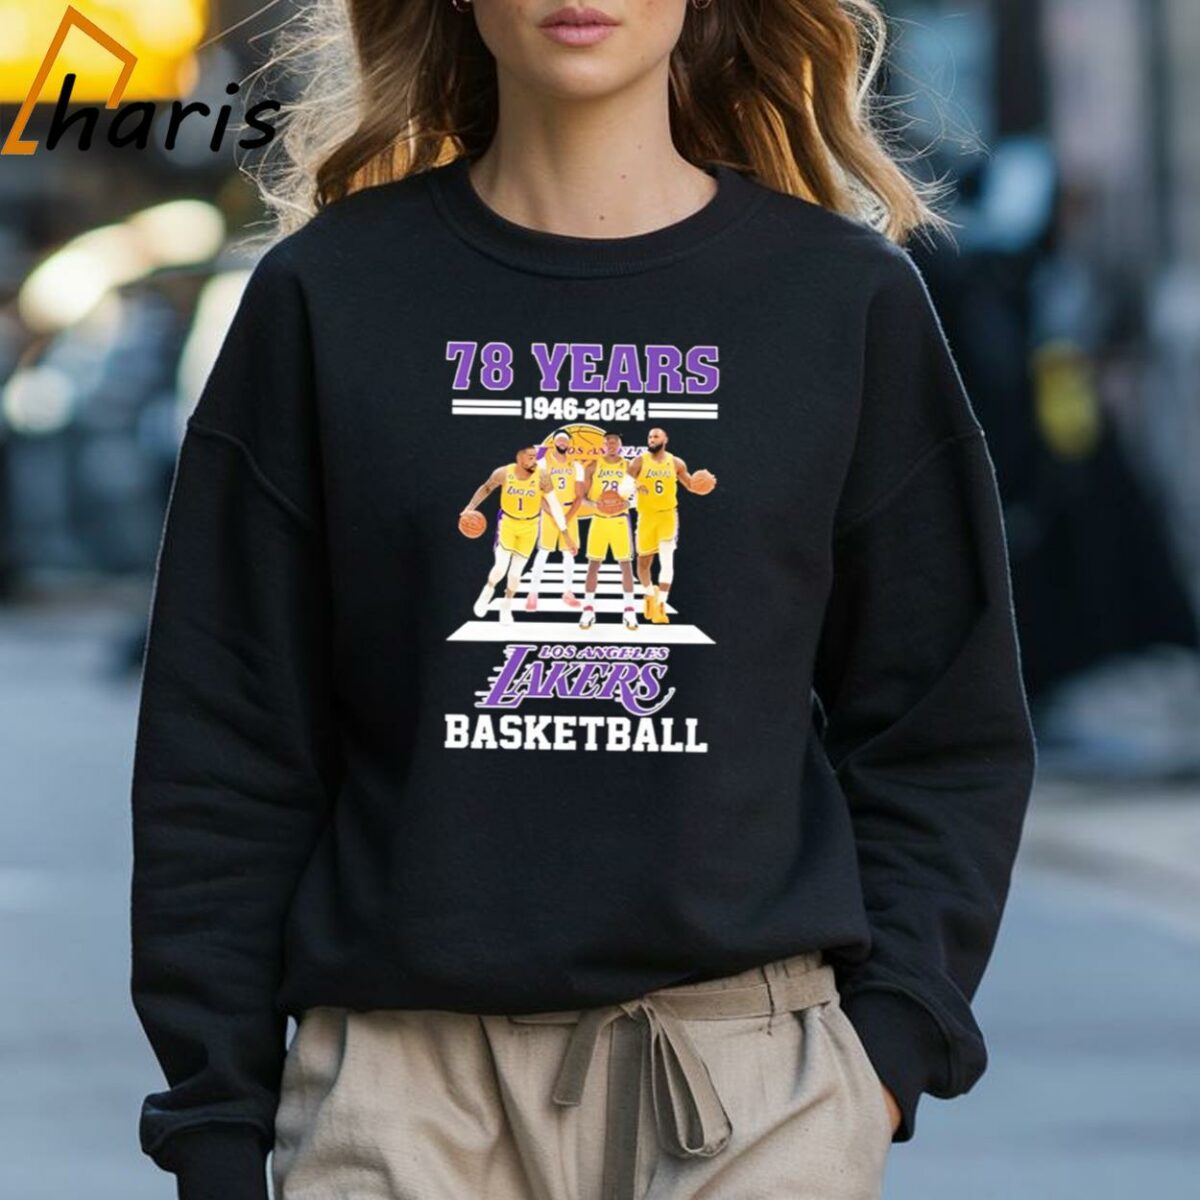 Los Angeles Lakers 78 Years Of The Memories And Achievements 1946 2024 T Shirt 3 Sweatshirt